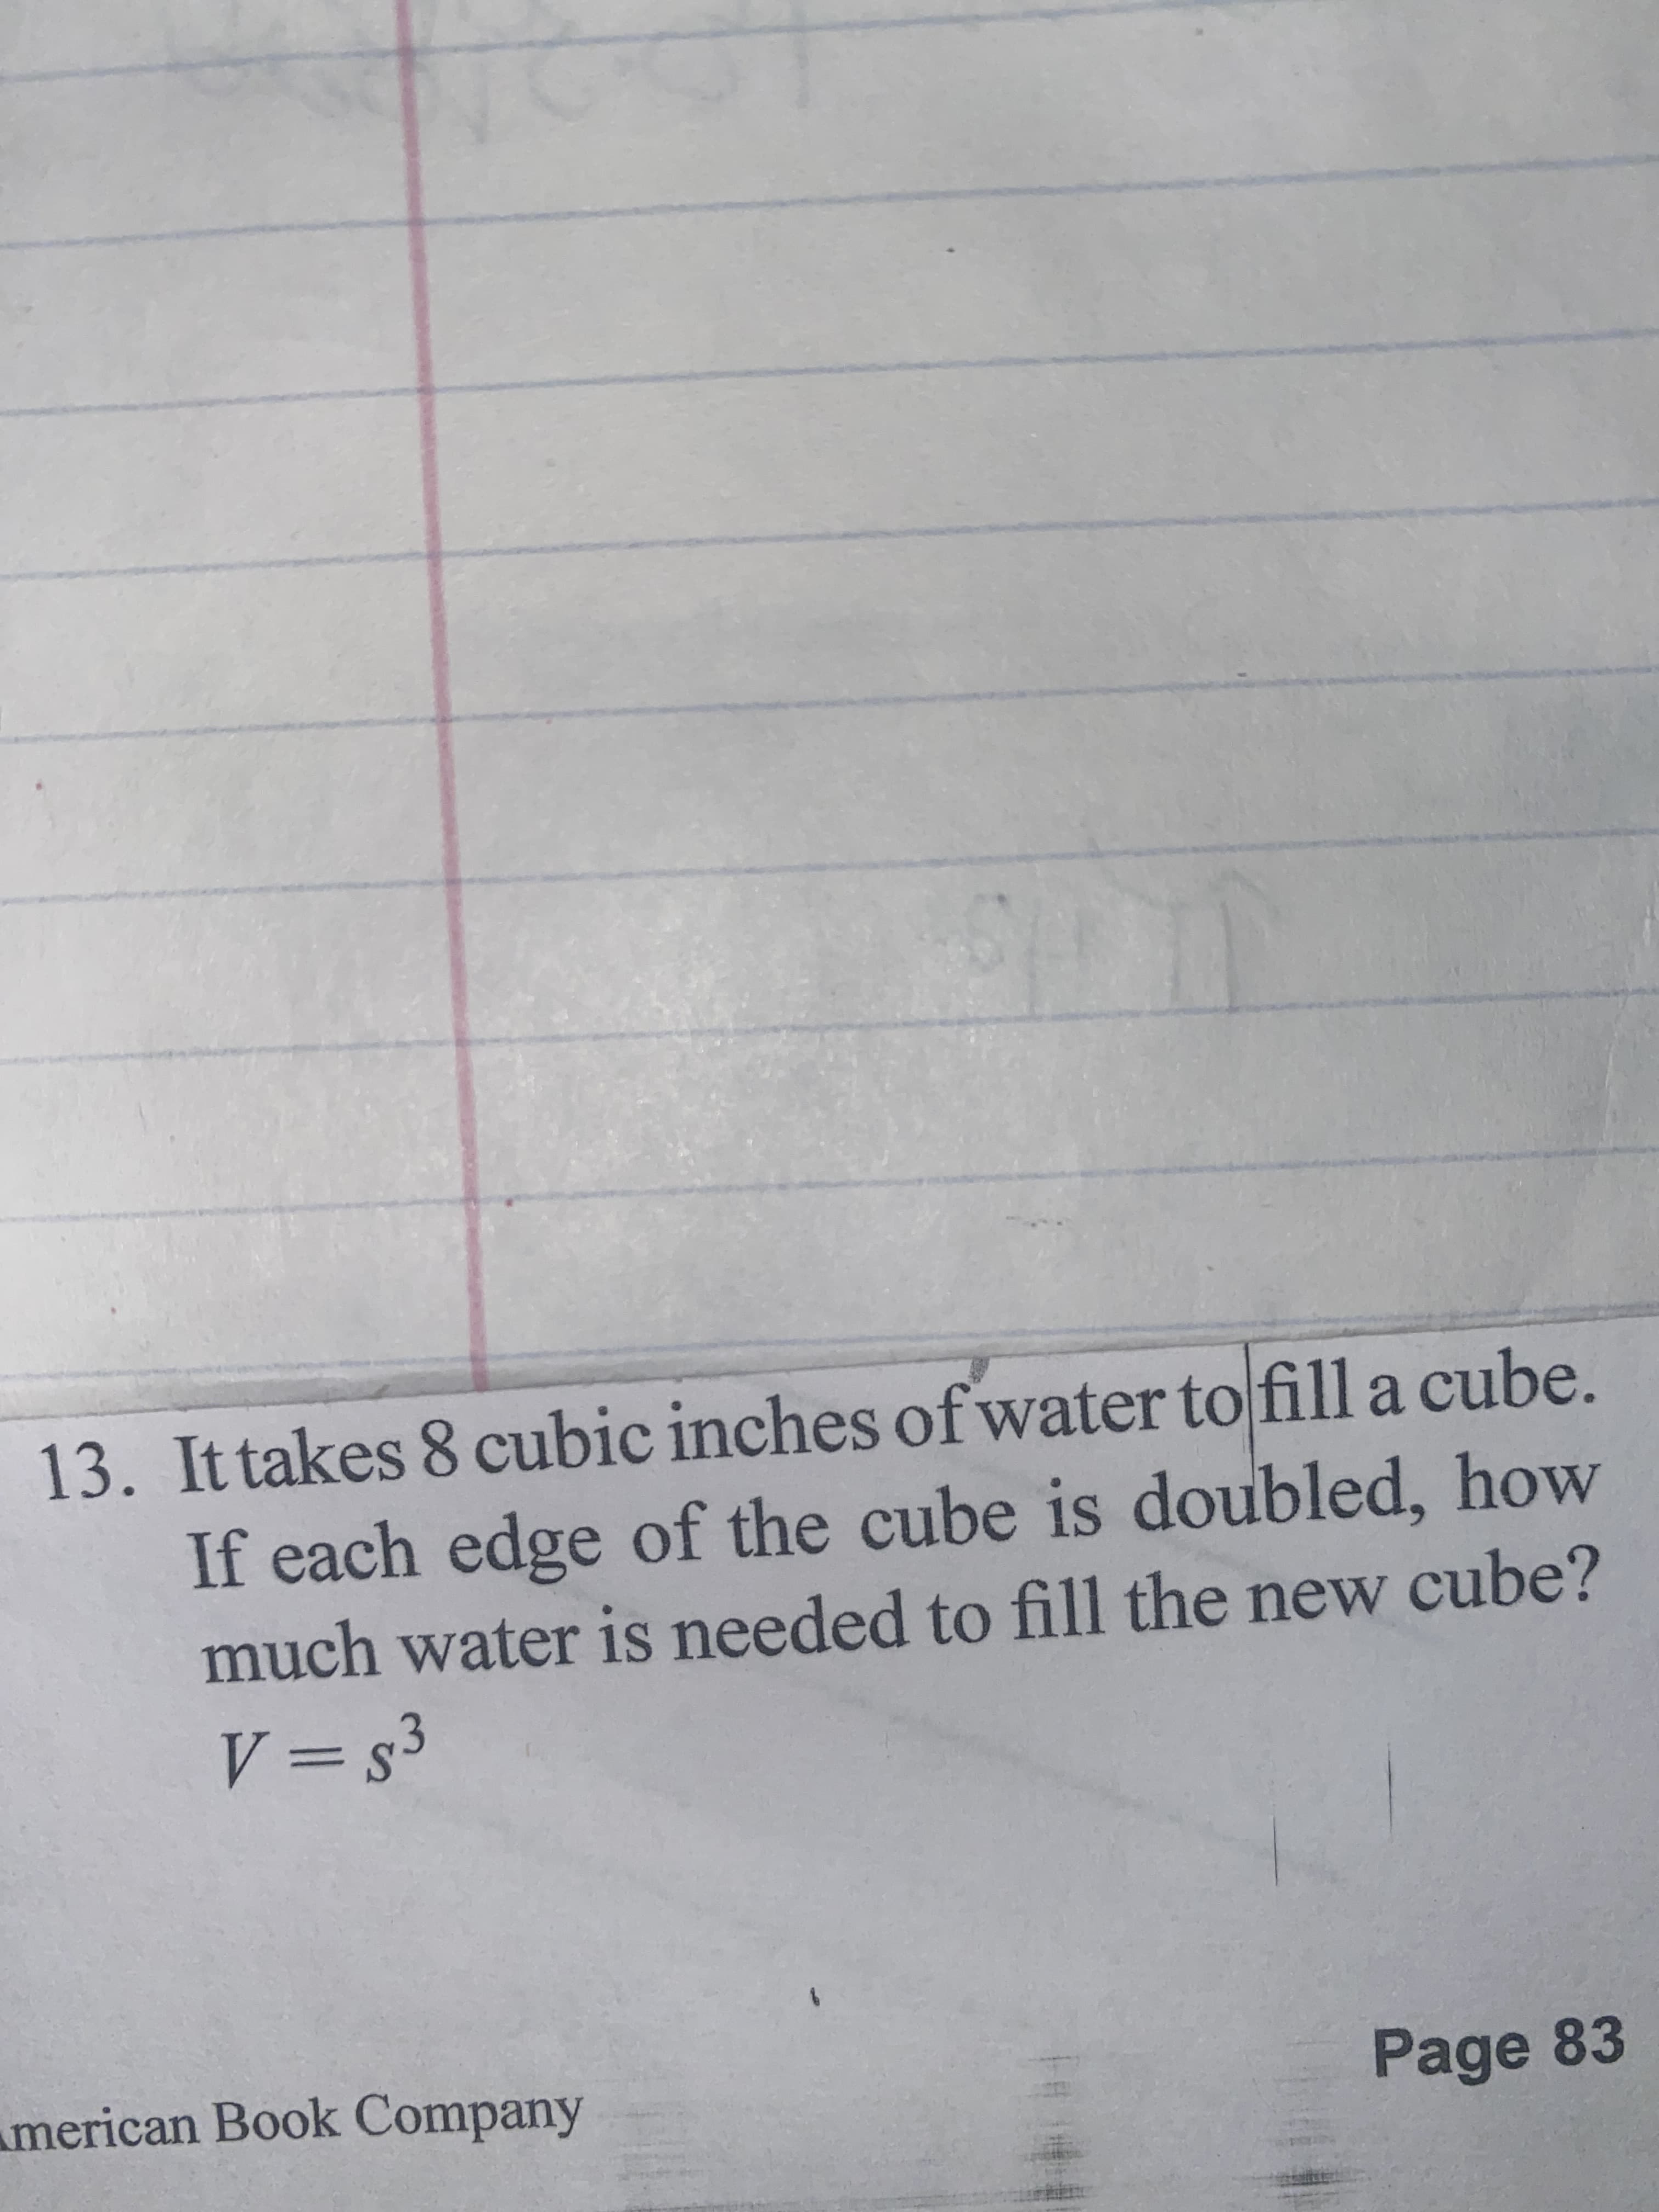 13. Ittakes 8 cubic inches of water to fill a cube.
If each edge of the cube is doubled, how
much water is needed to fill the new cube?
ES = A
merican Book Company
Page 83
